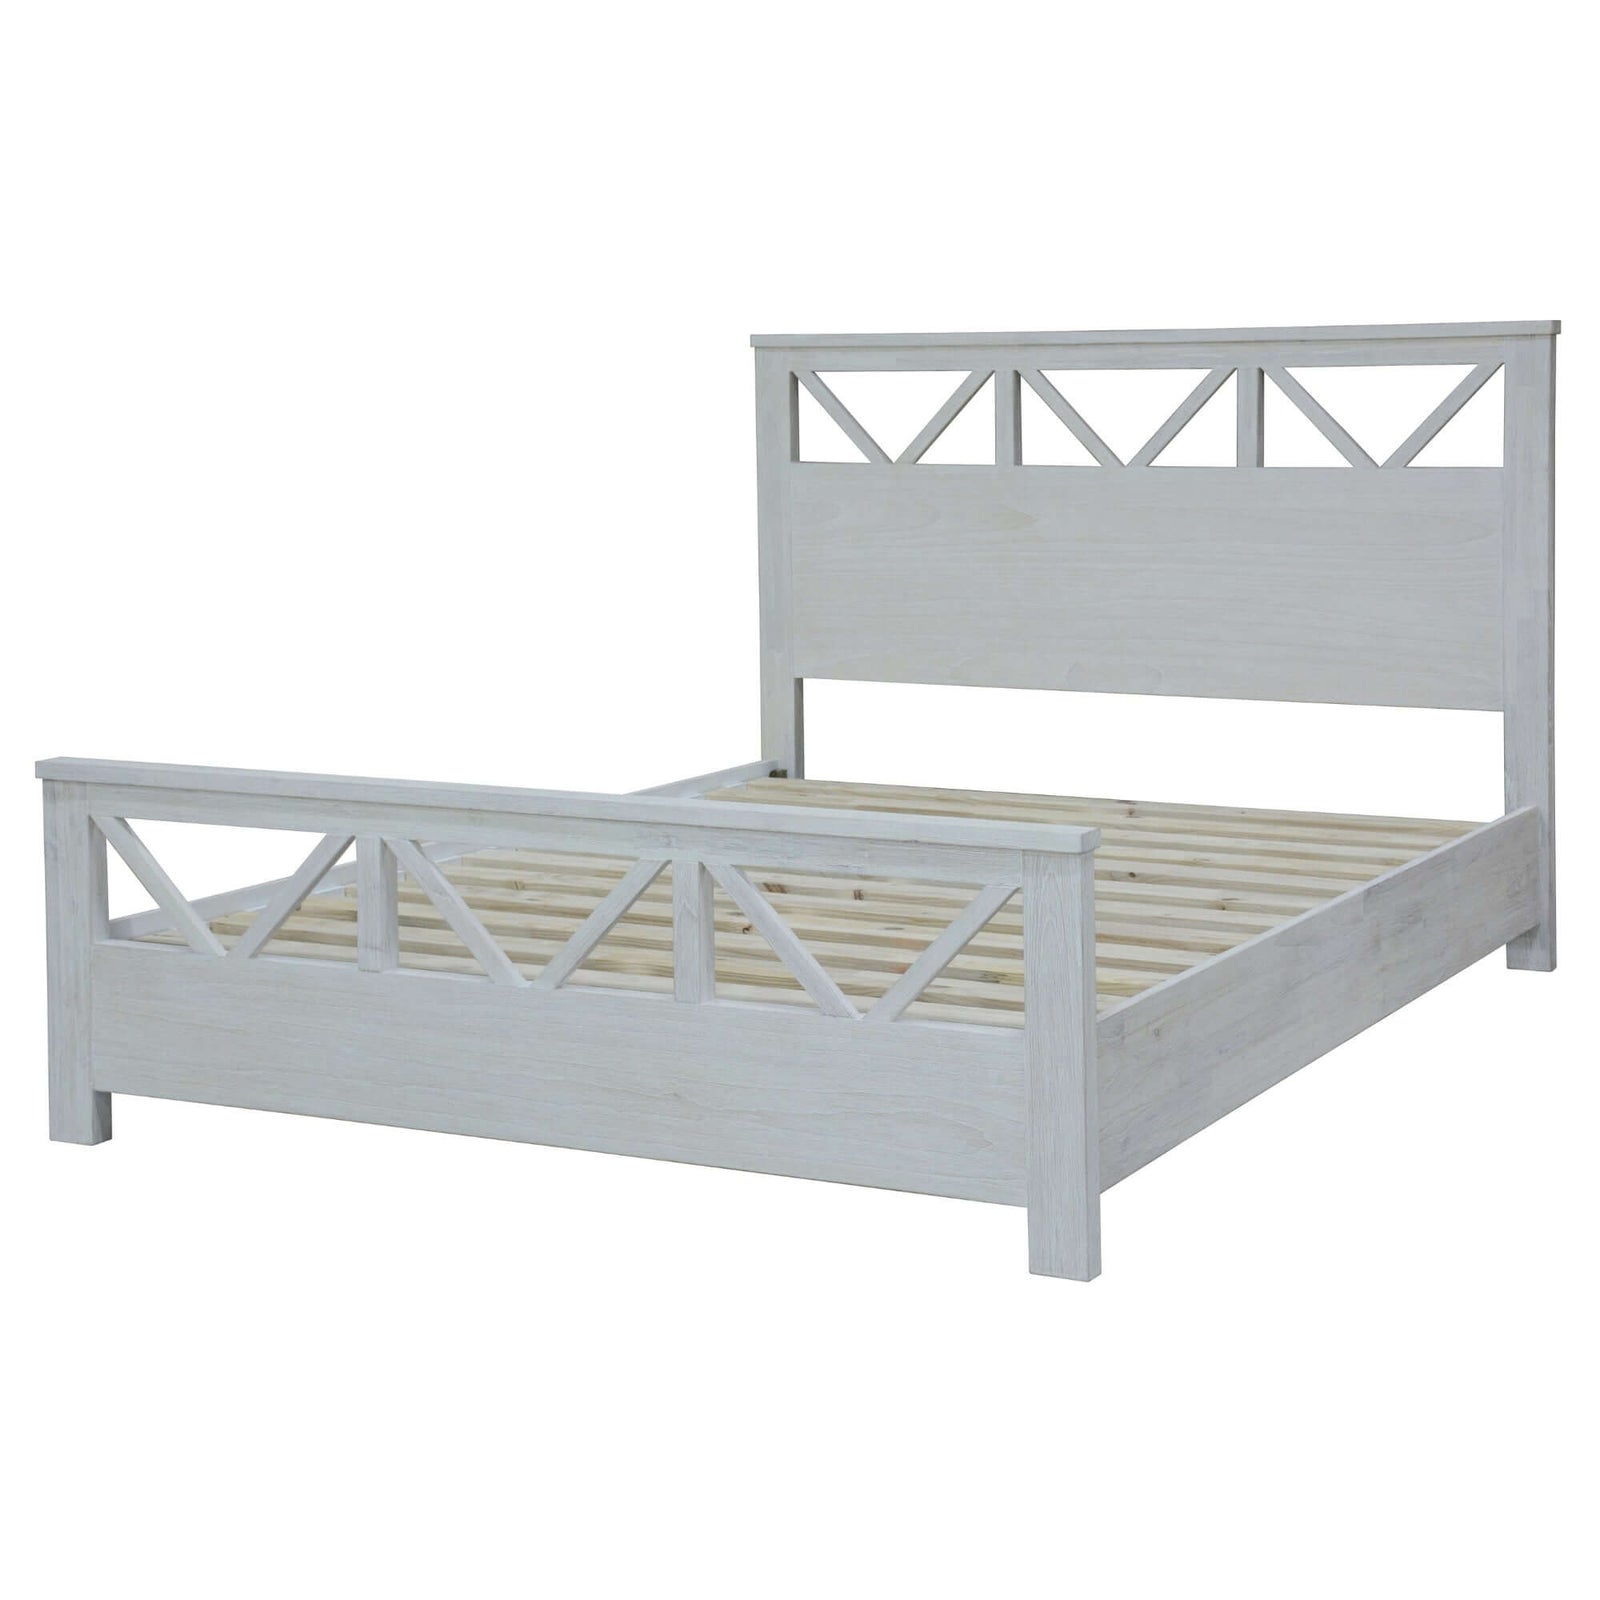 Myer King Size Solid Timber Bed Frame - White Wash-Upinteriors